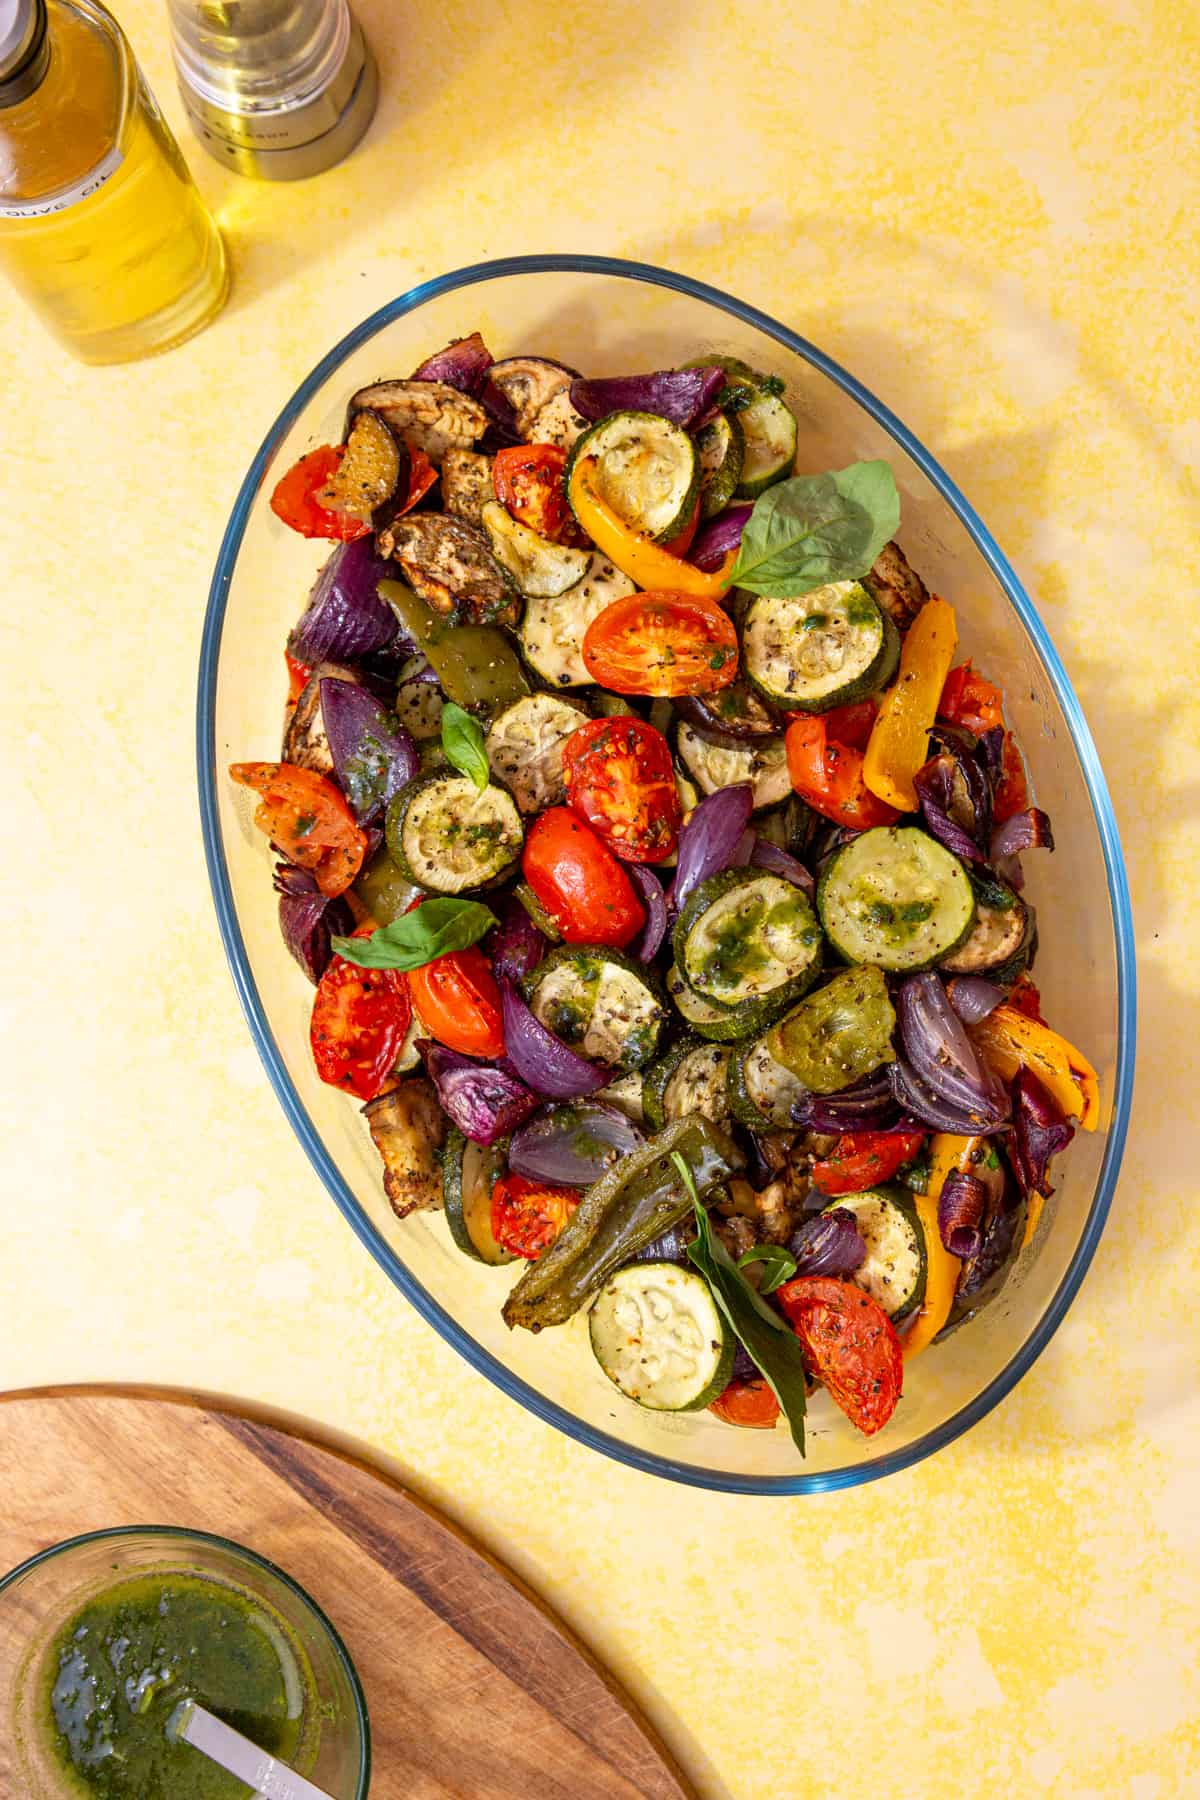 Roasted vegetables such a courgettes, tomatoes, peppers, red onions in a oval dish next to a bowl of green sauce mixture on a wooden board.